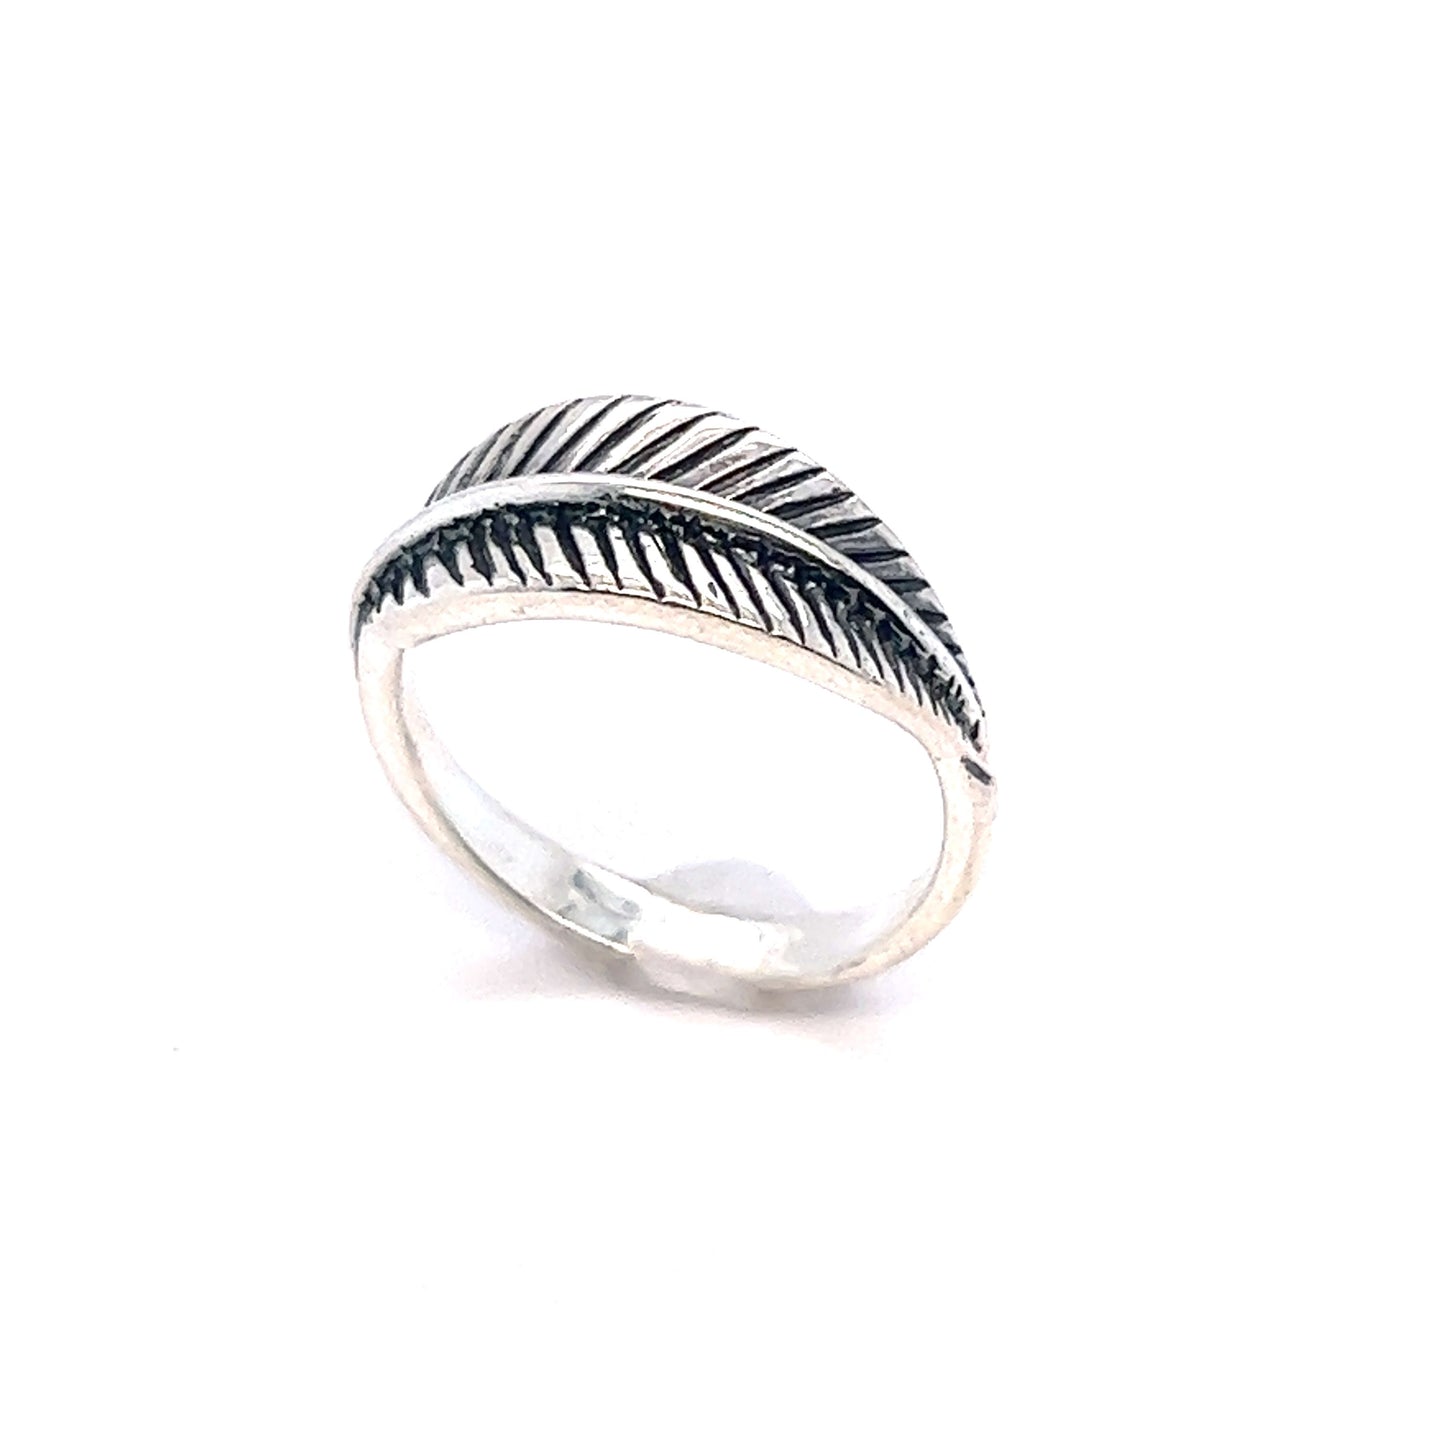 A Super Silver Oxidized Feather Ring with a southwestern design.